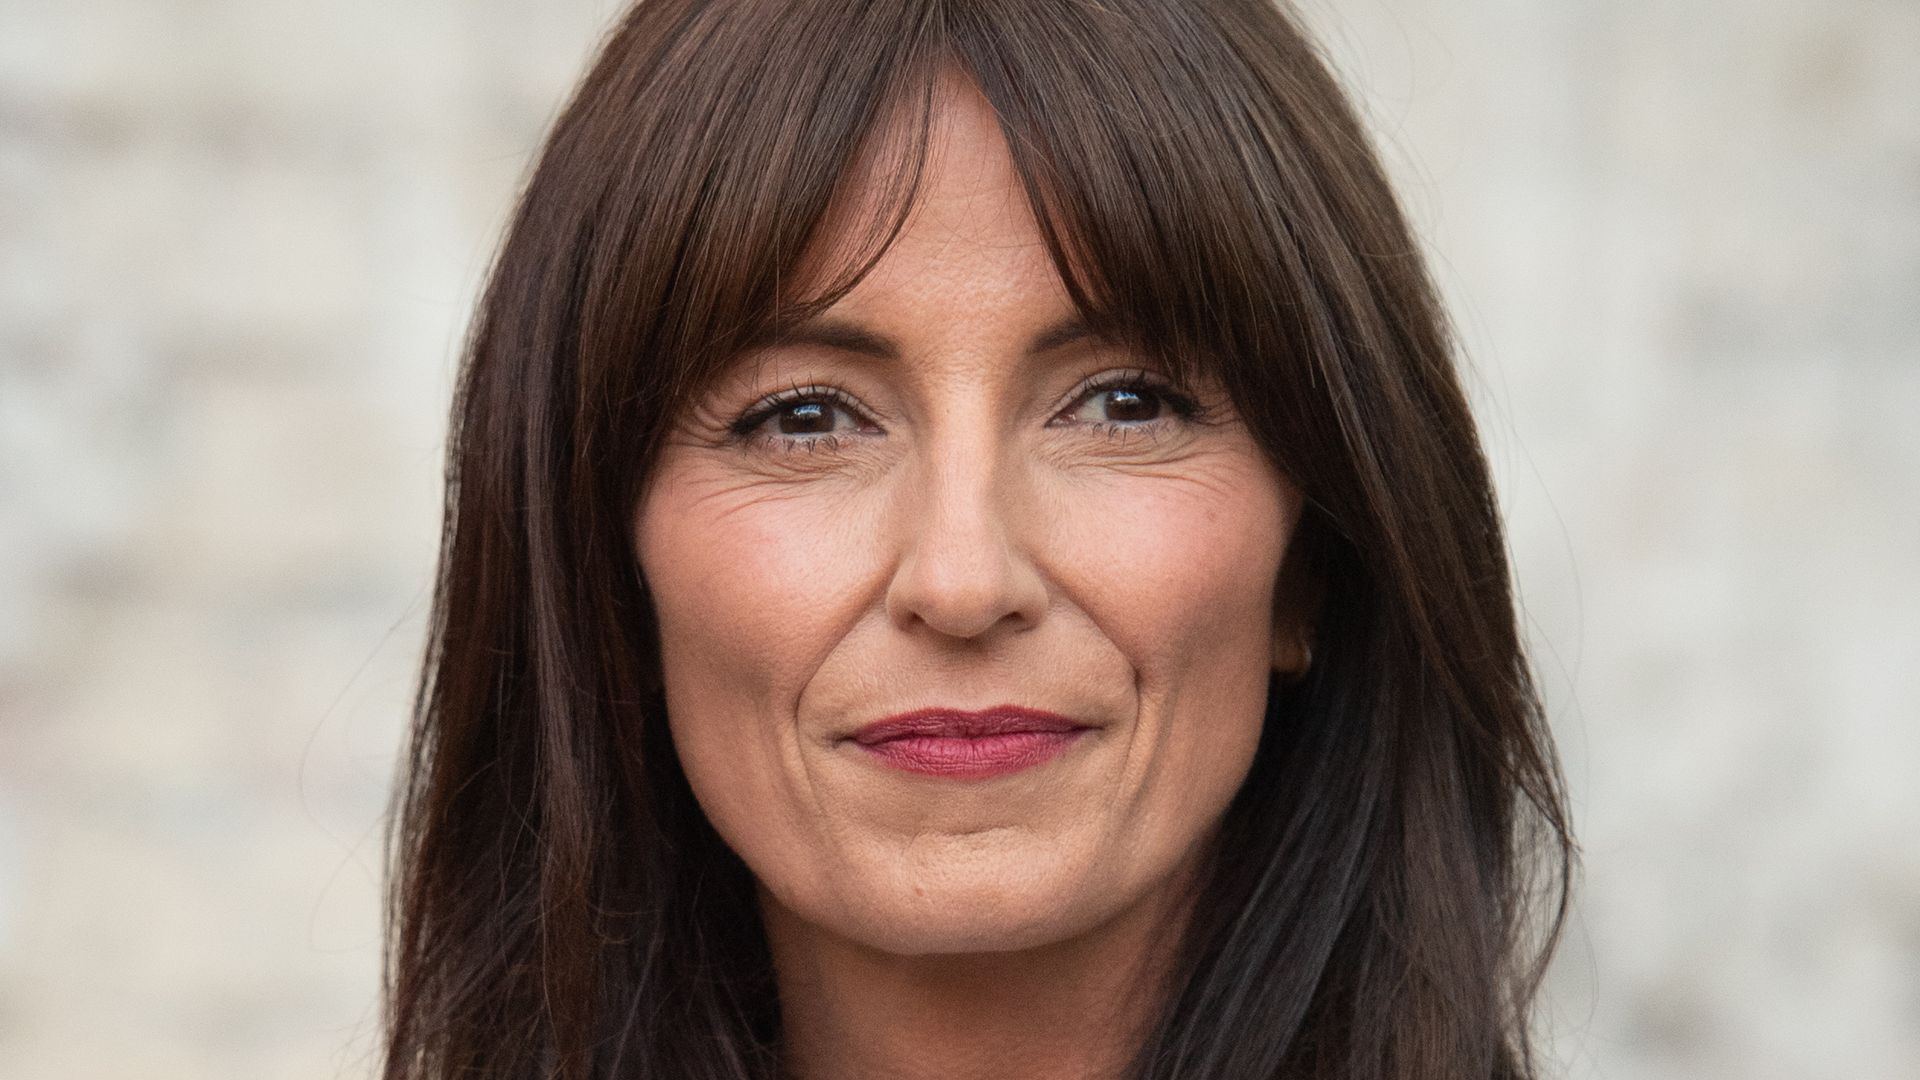 Davina McCall attends Suns Who Cares Wins Awards in white top